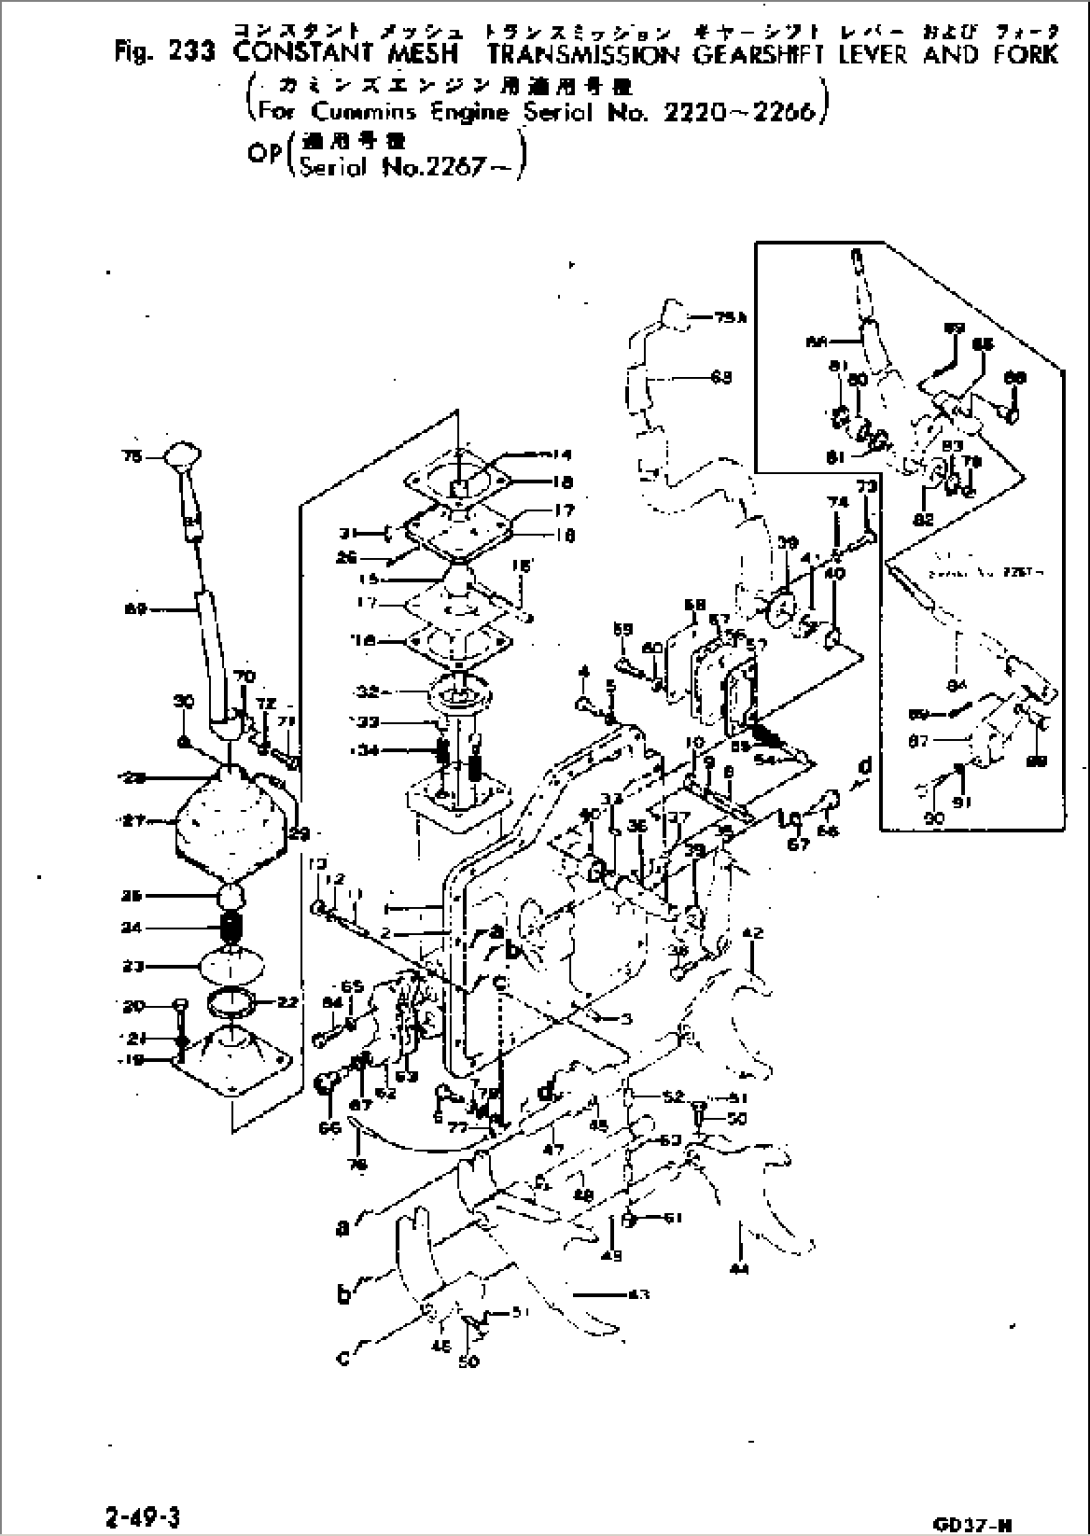 CONSTANT MESH TRANSMISSION GEARSHIFT LEVER AND FORK (OP)(#2267-)